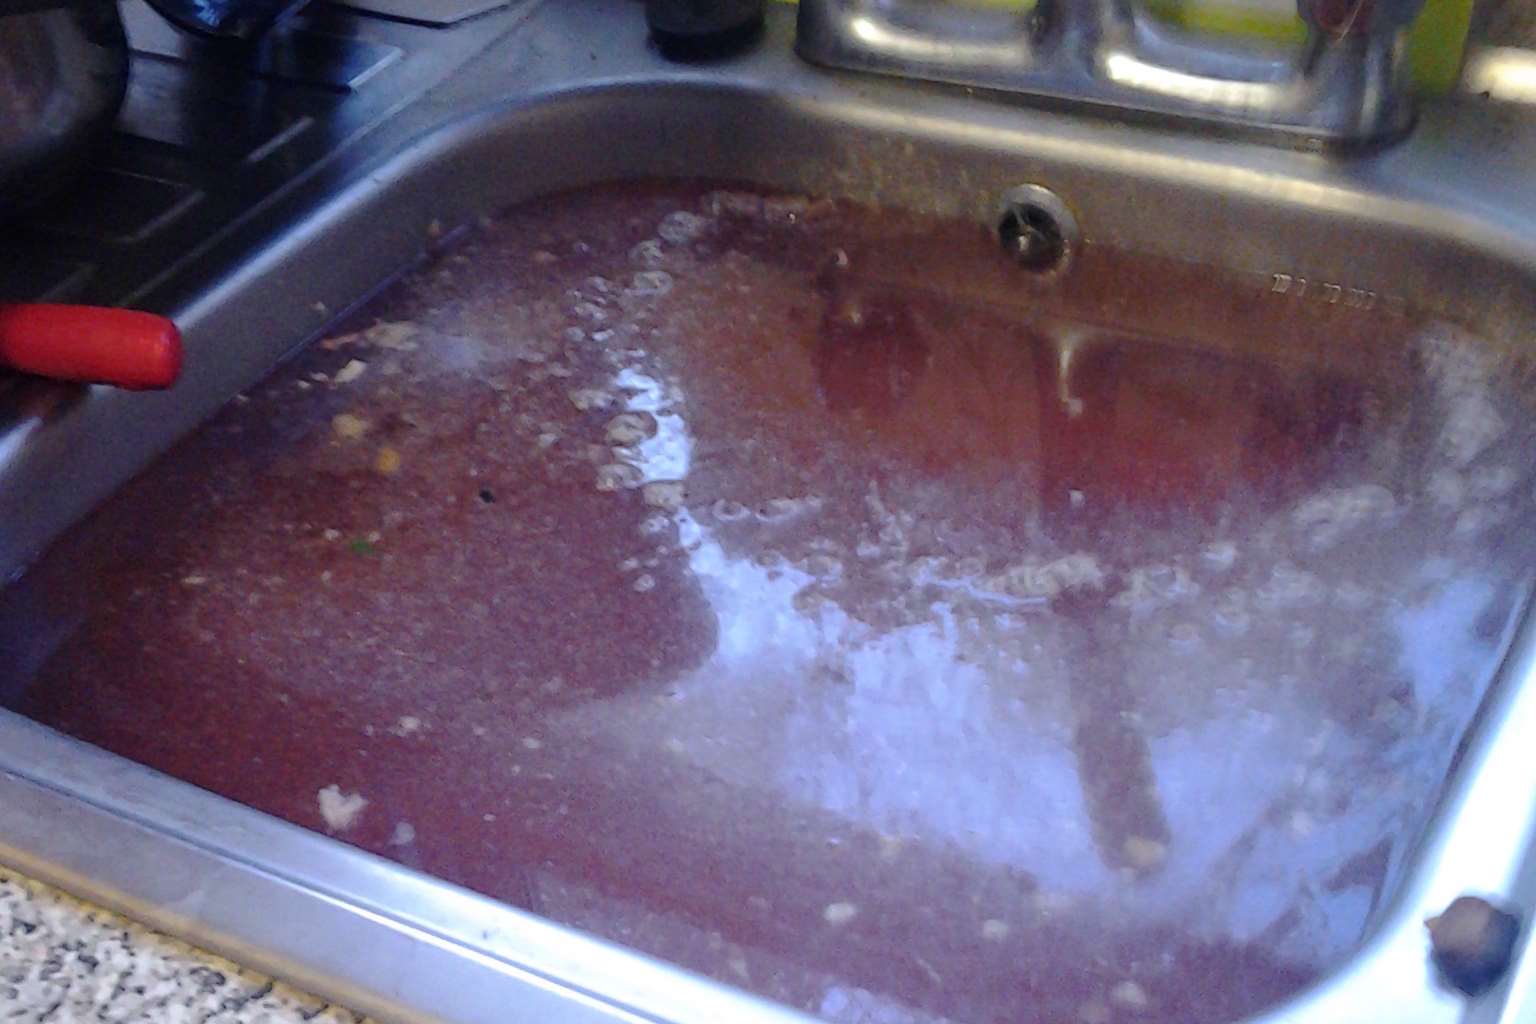 The flat floods with sewage that comes up through the sink